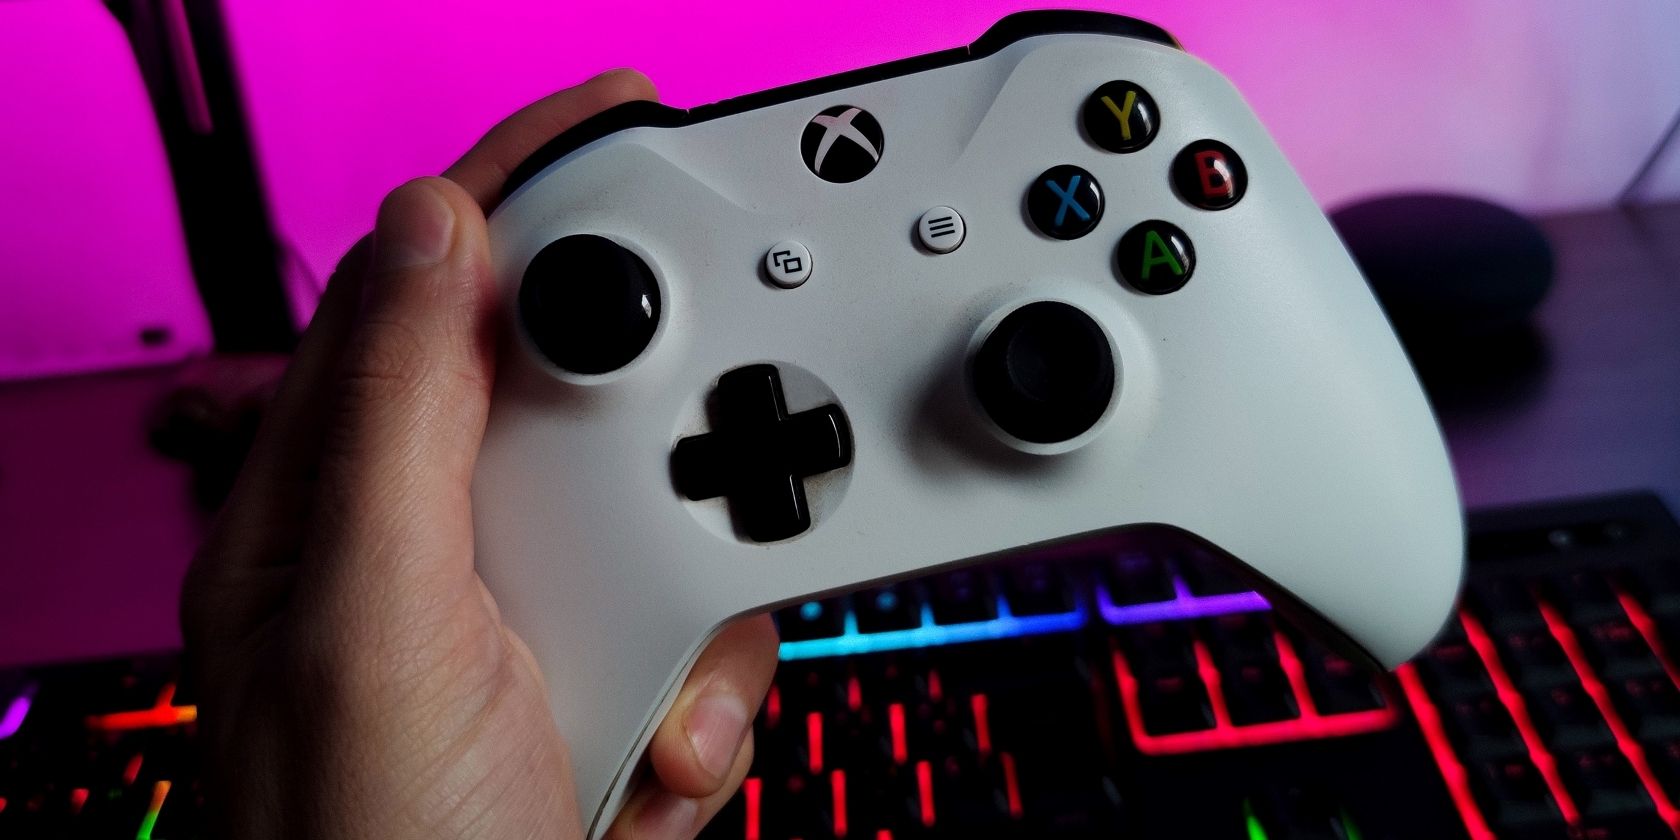 A photograph of a person holding a white Xbox One controller in front of a monitor